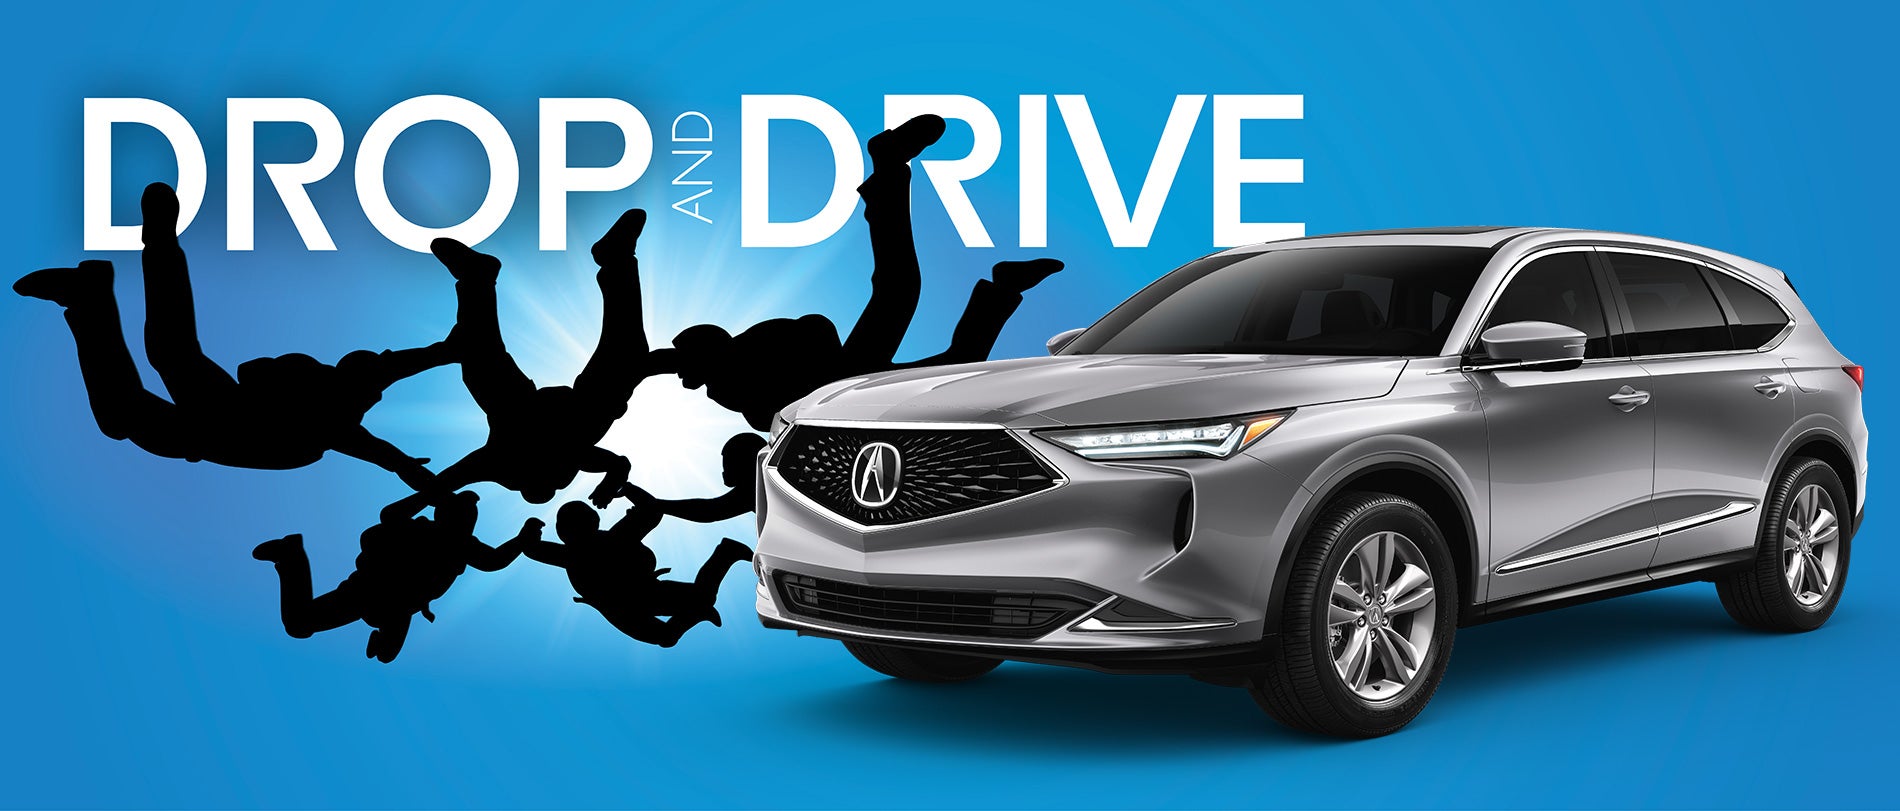 Scanlon Acura Drop & Drive Deal: bring your vehicle in for service, drive away in a complimentary loaner!